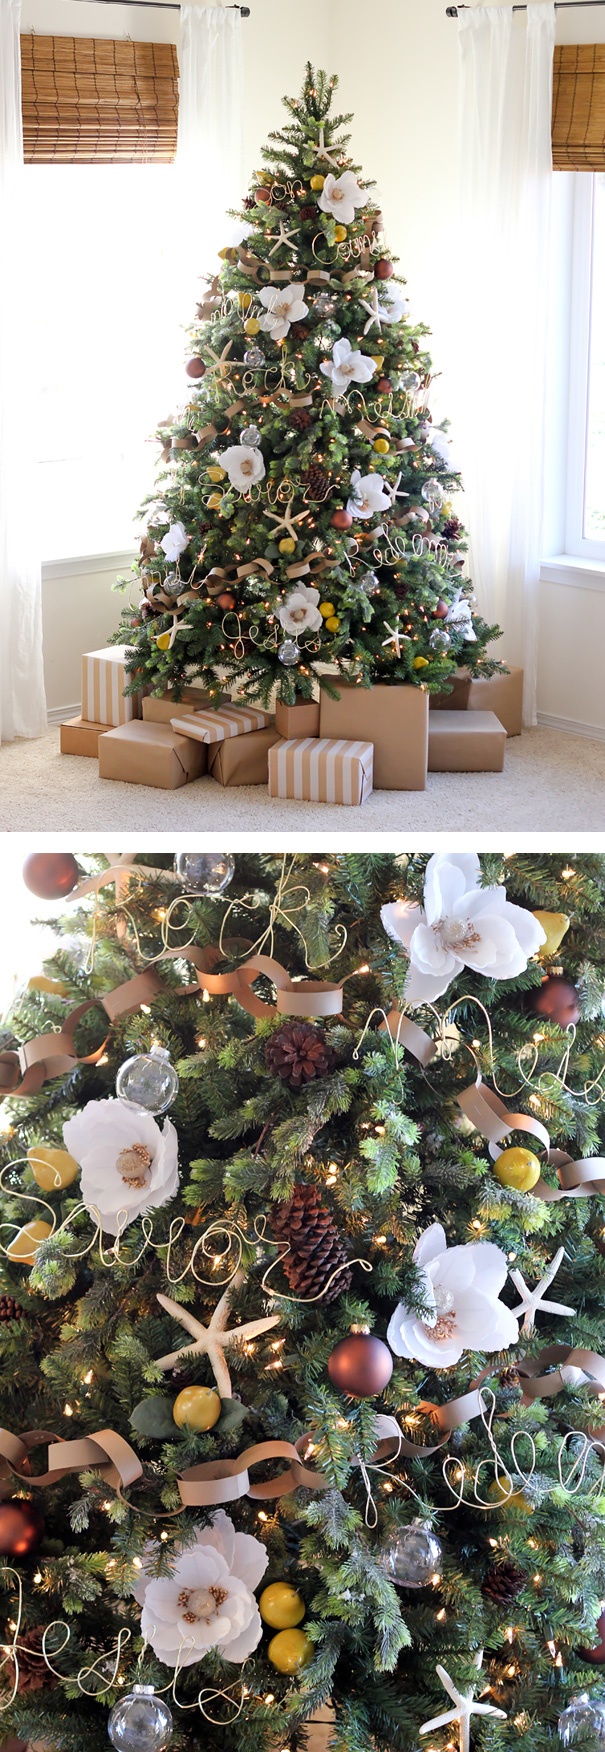 People Are Decorating Their Christmas Trees With Flowers And The Results Are4